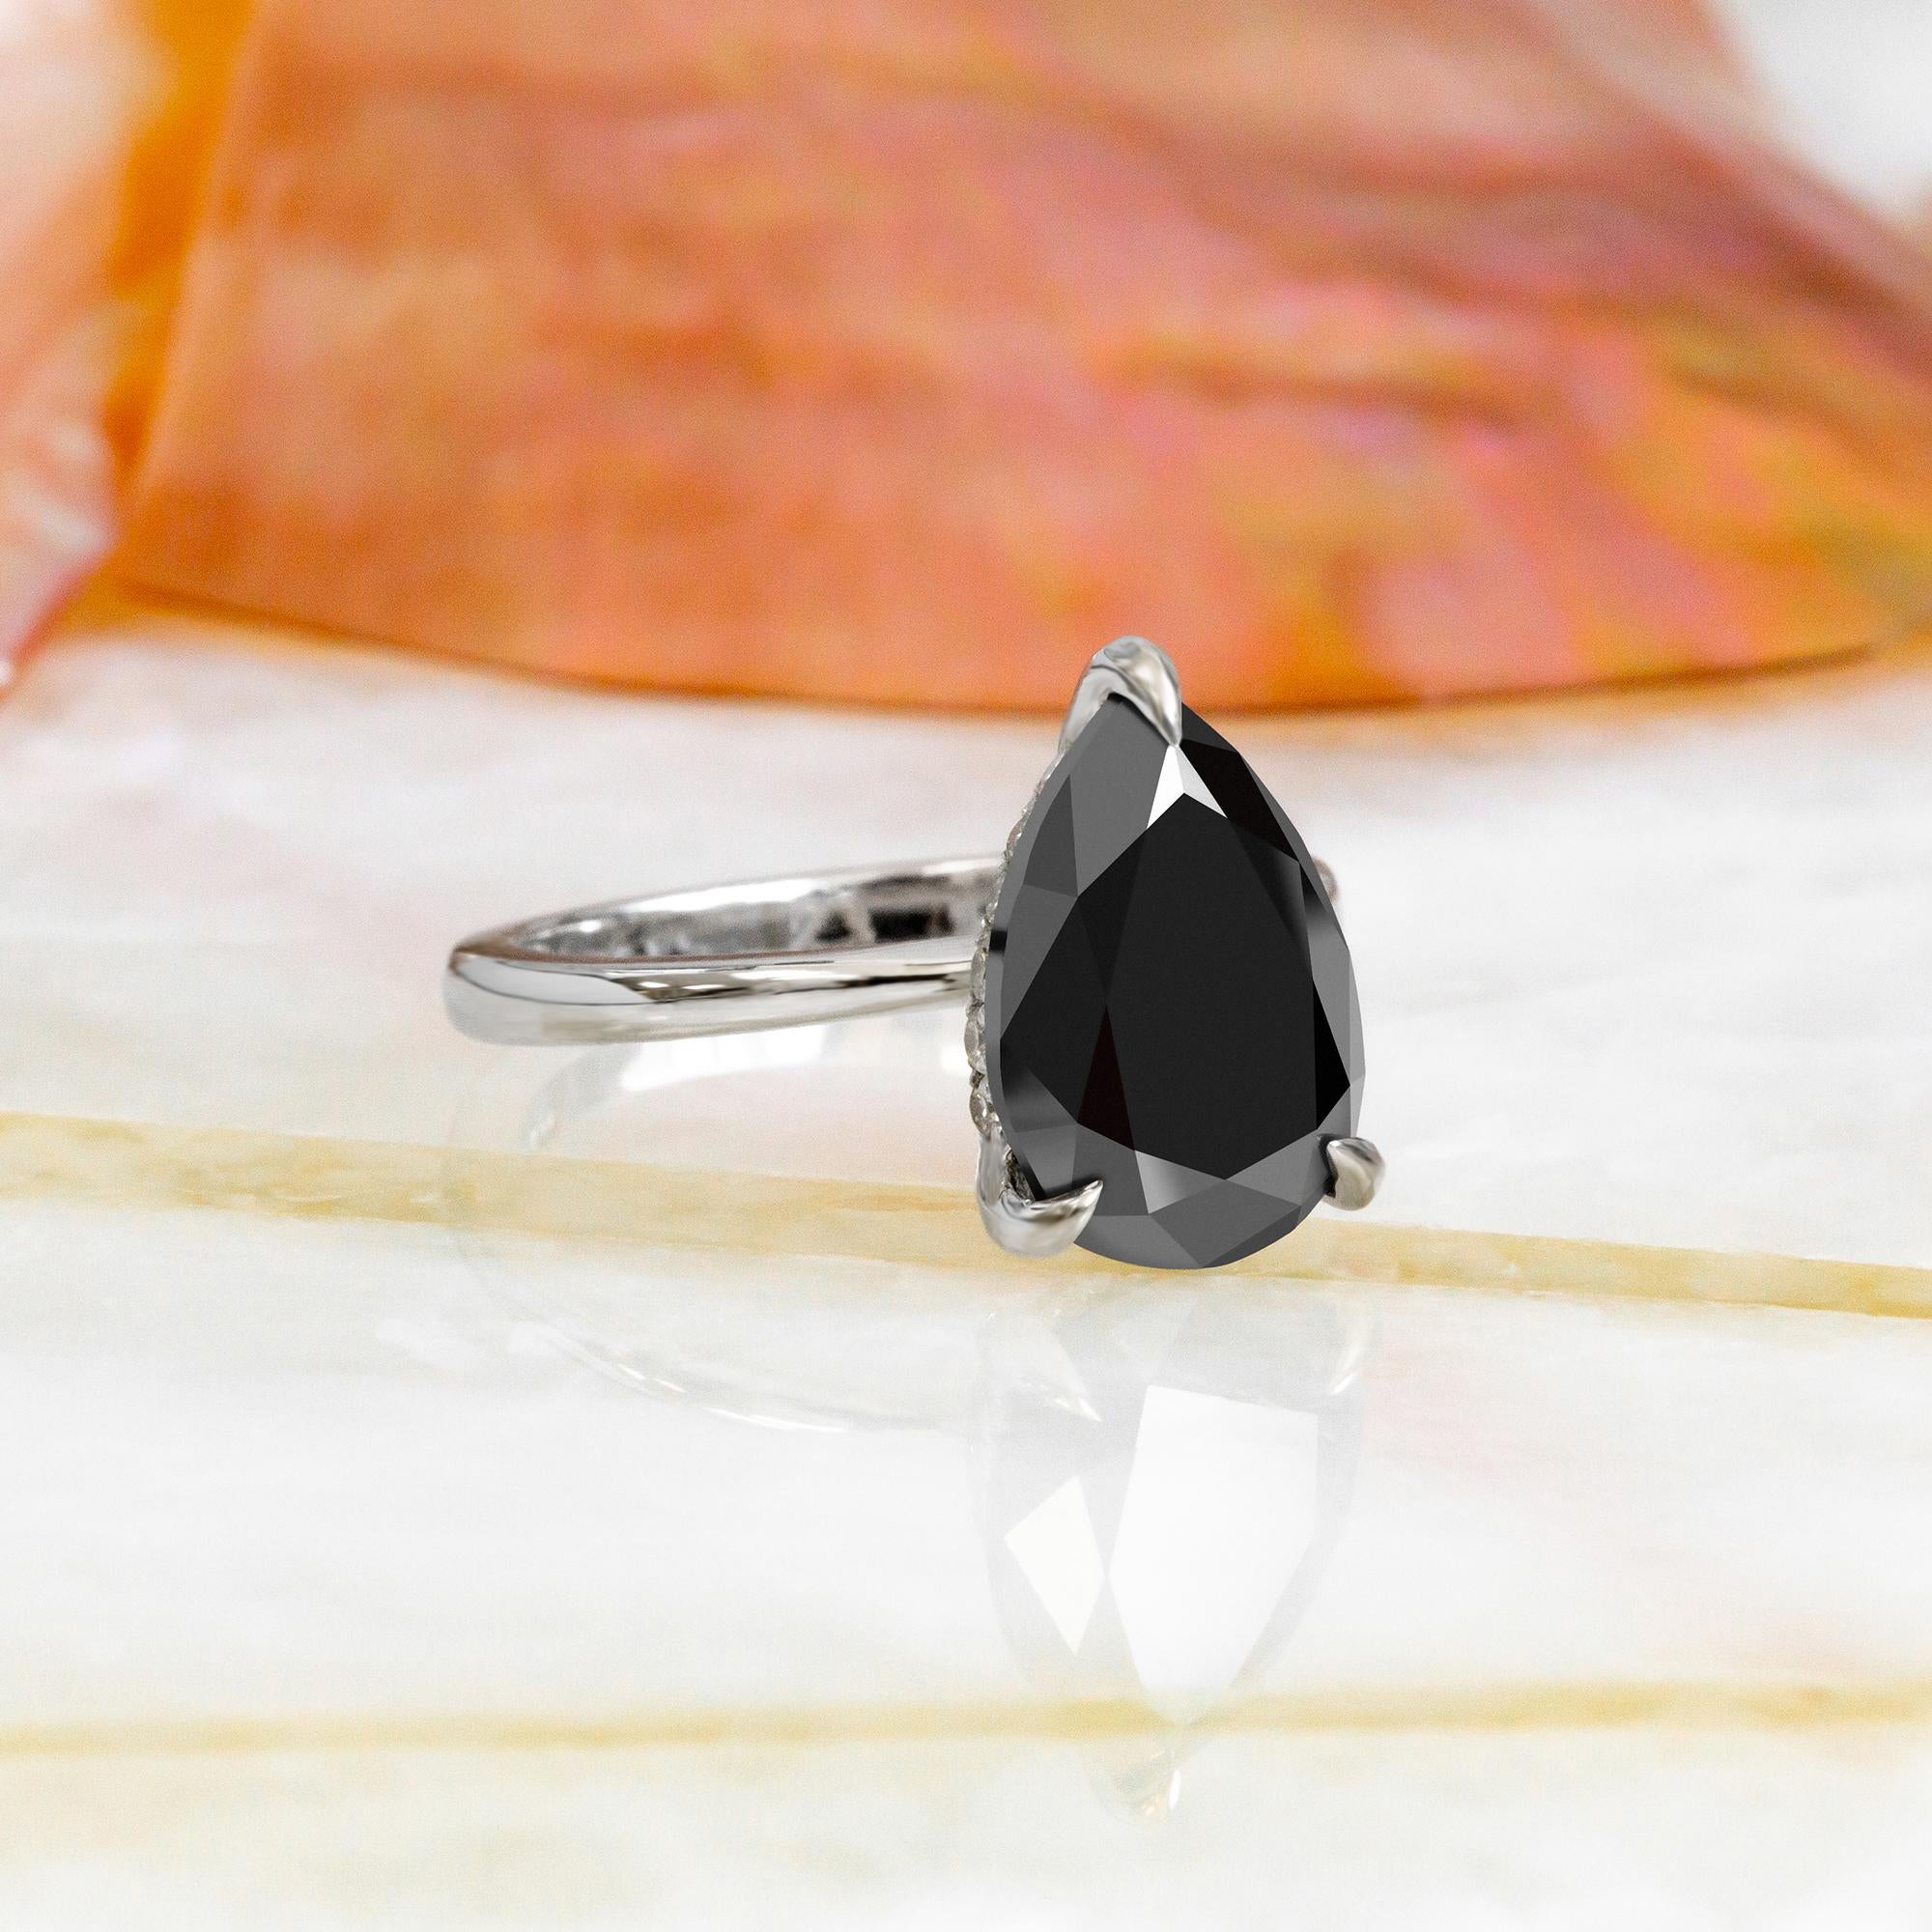 -Total Carat Weight: 3.17 carats
-14K White Gold
-Size: Resizable

Notes:
- All diamonds are natural, earth-mined diamonds that were suitable for Color Enhancement into Fancy Black color.
- All Jewelry are made to order hence any size and gold